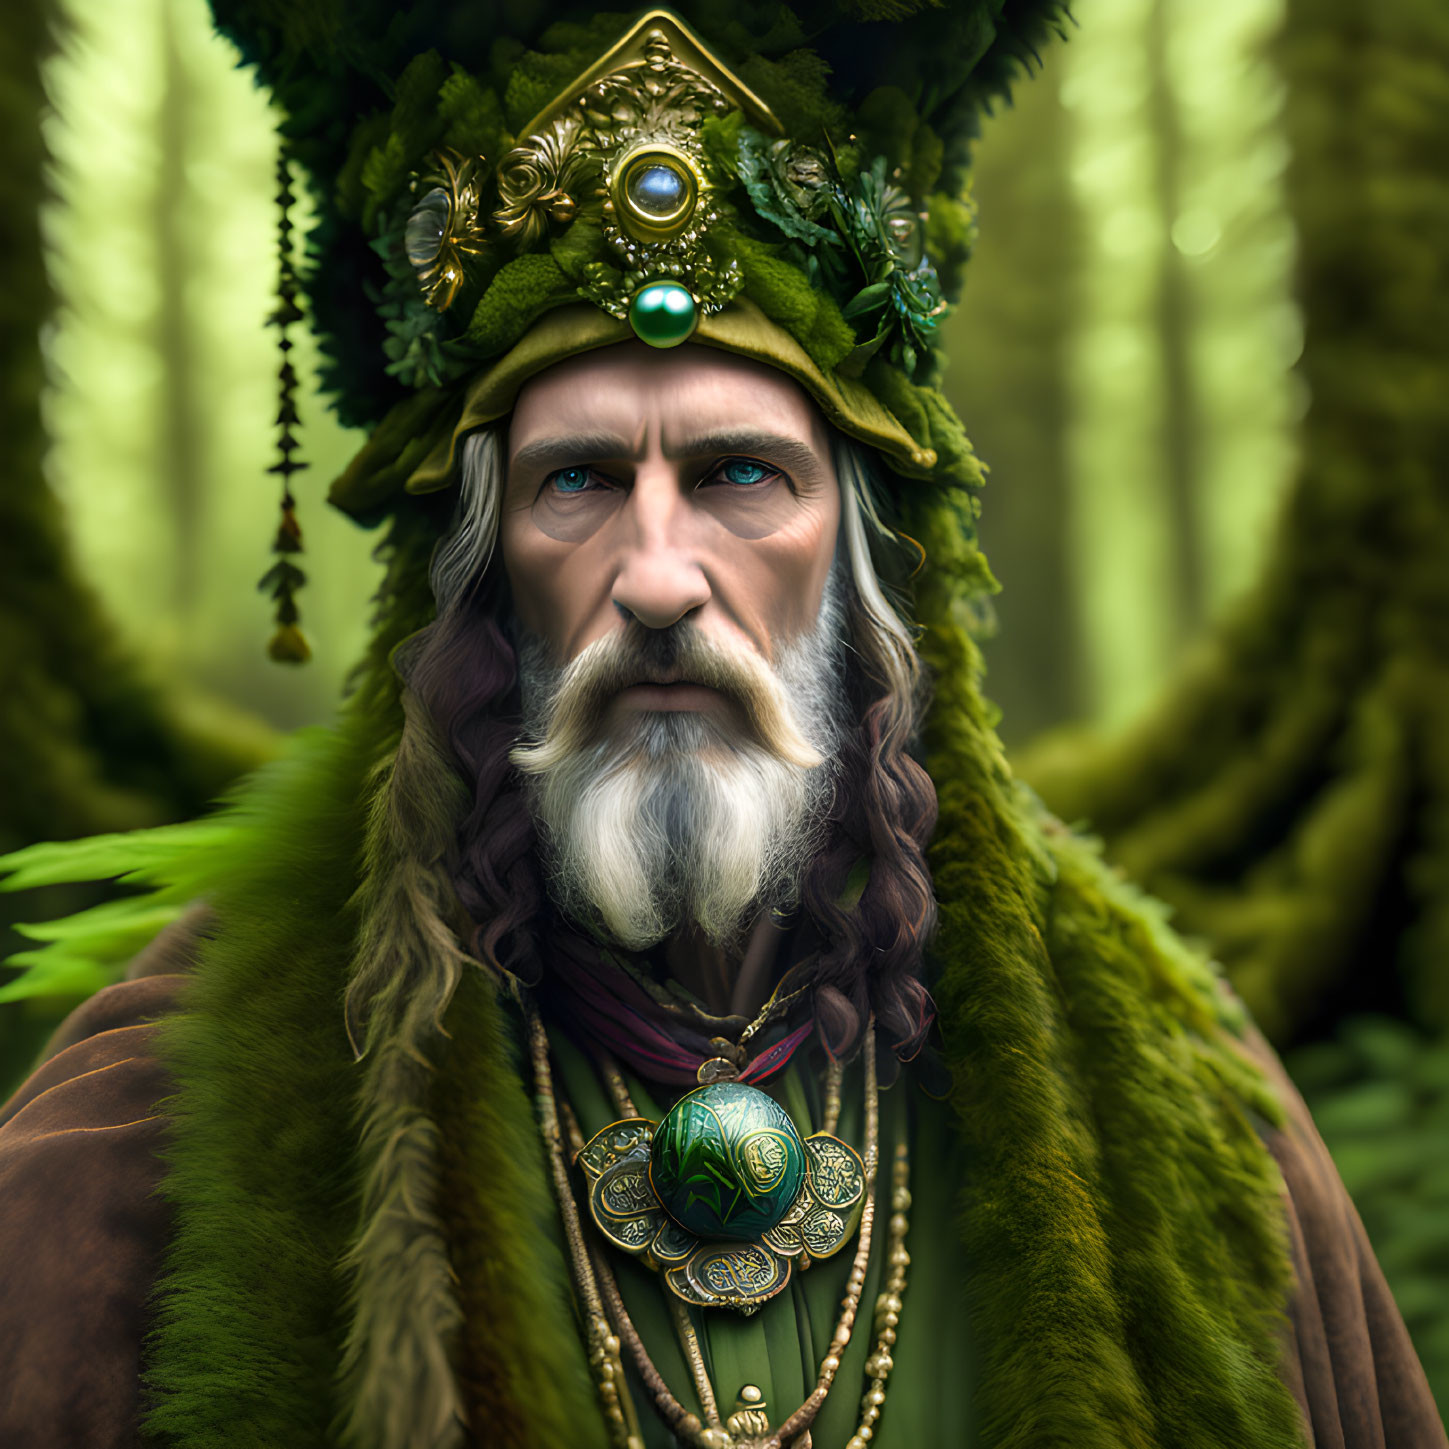 The Druid King Morcant